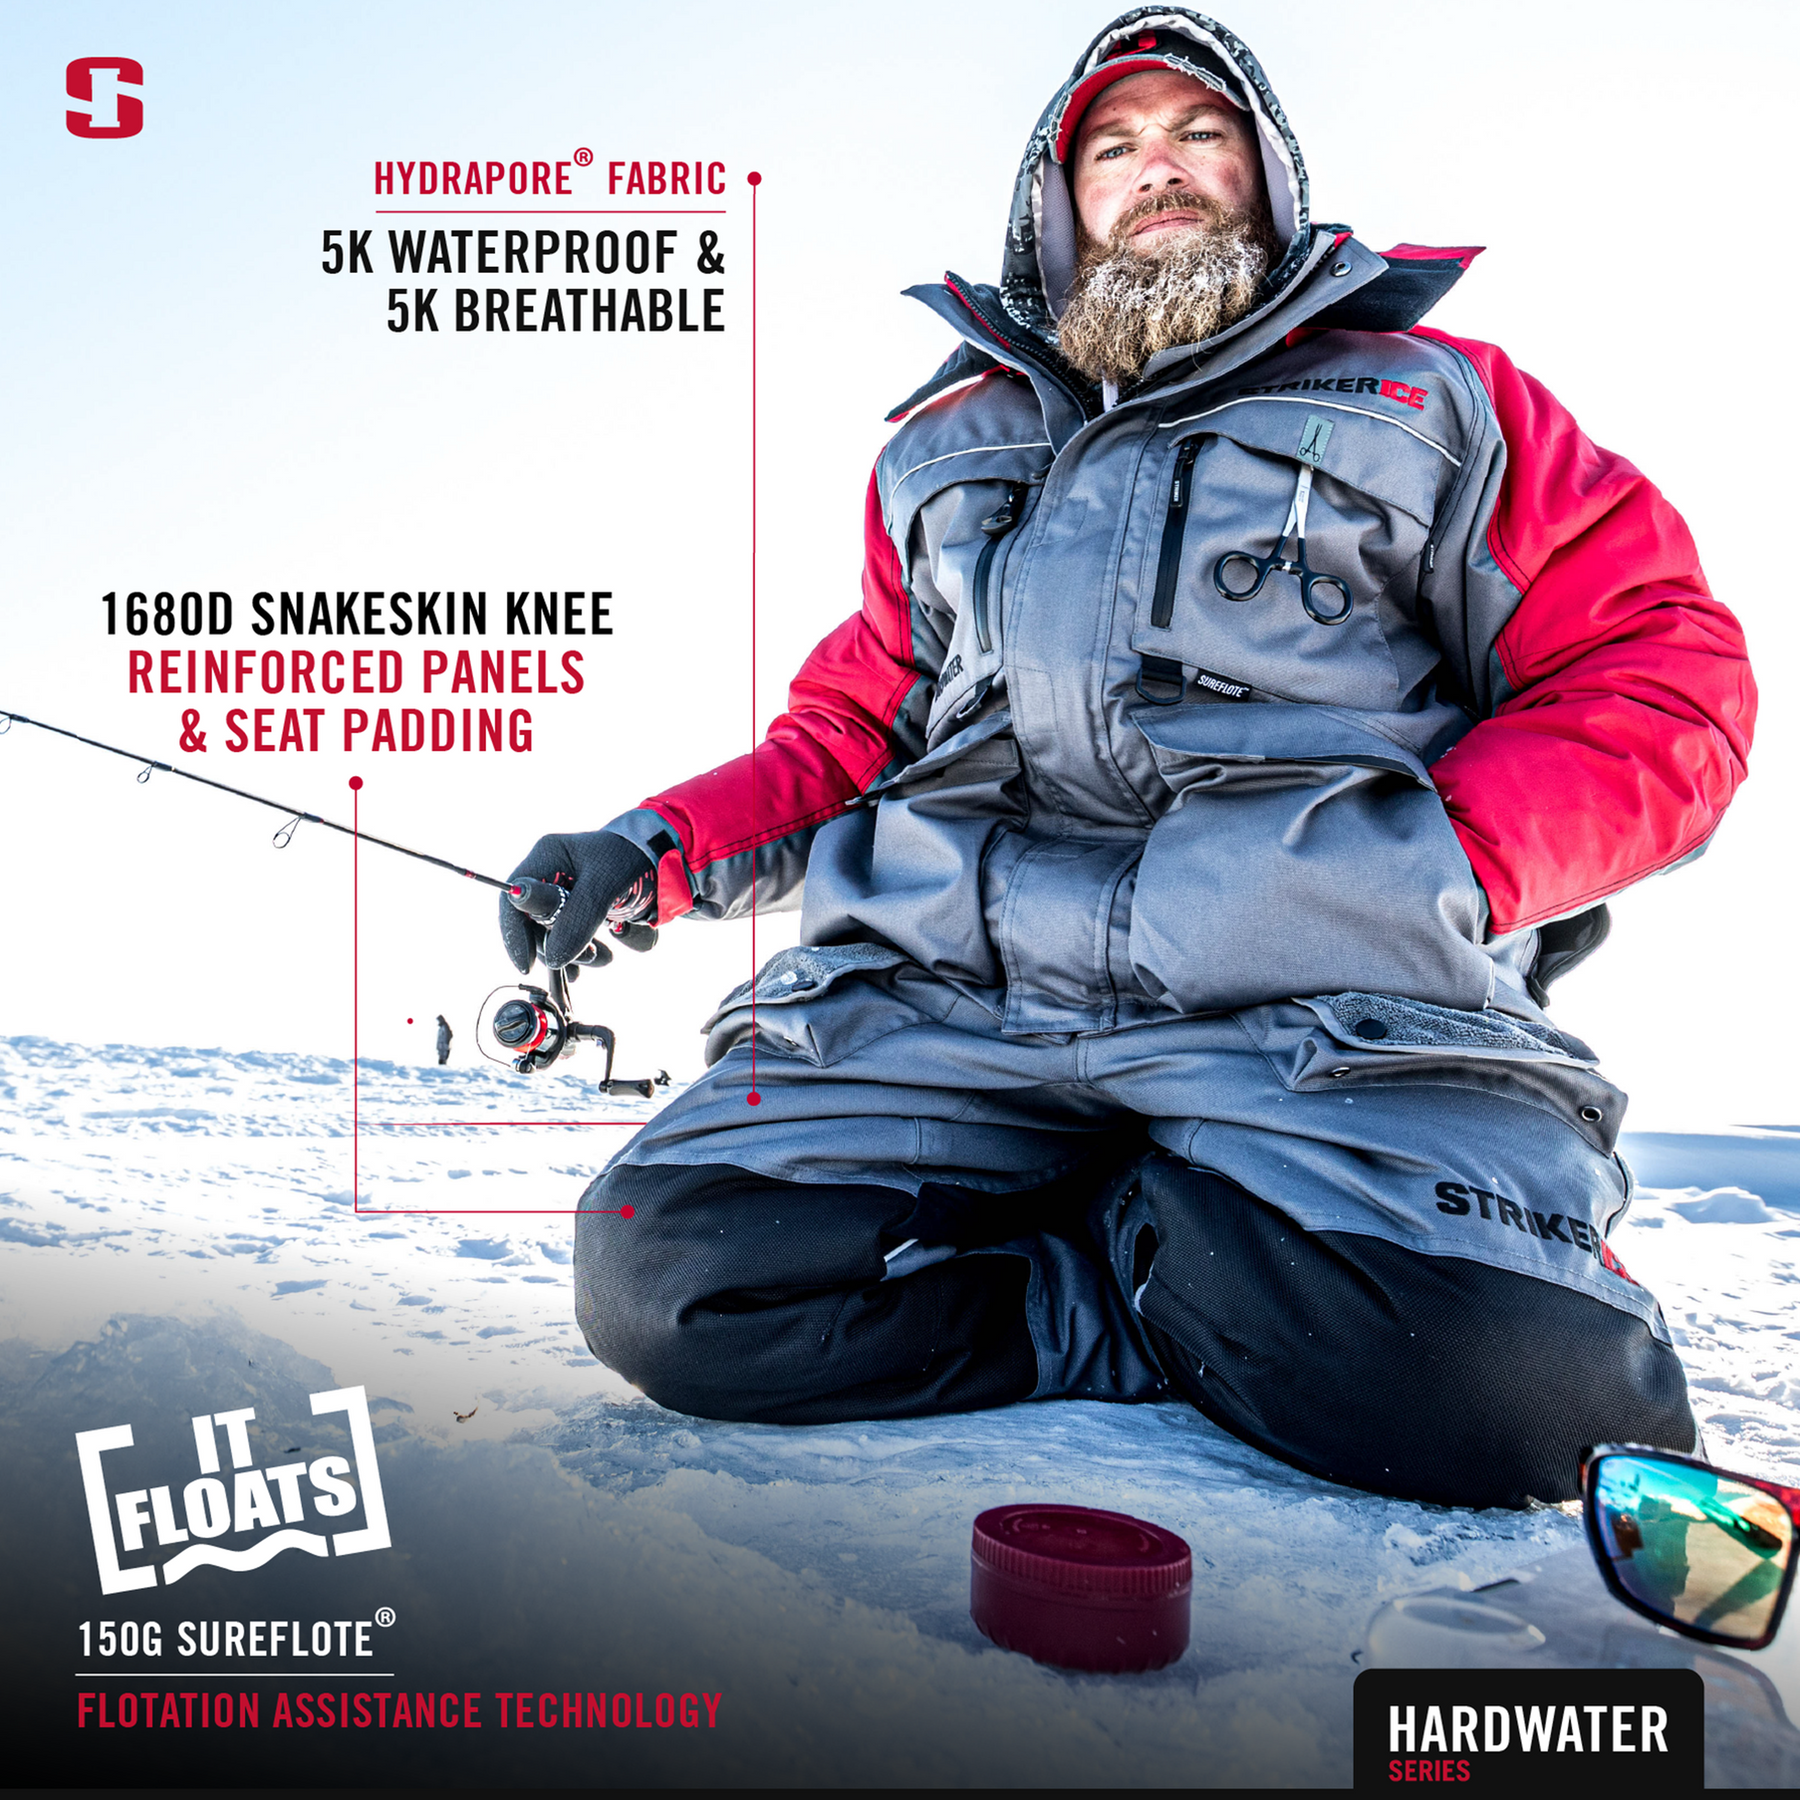 striker hardwater suit for Sale,Up To OFF 75%